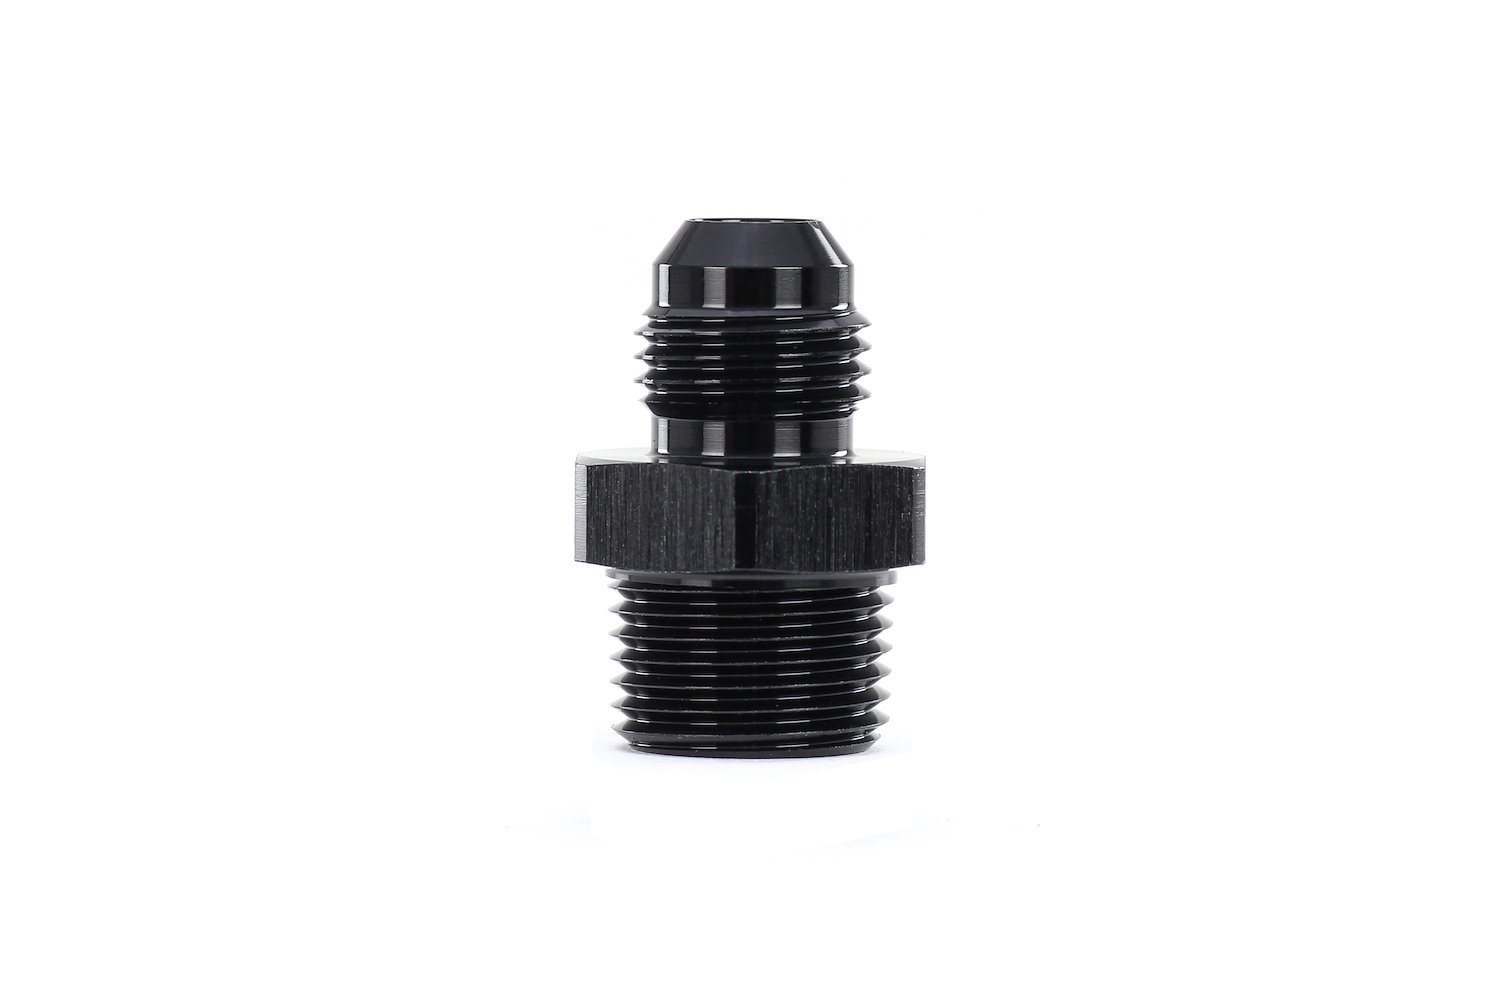 AN8168xM2015 AN Flare to Metric Adapter, Convert Metric Female Threads To Male An Flare